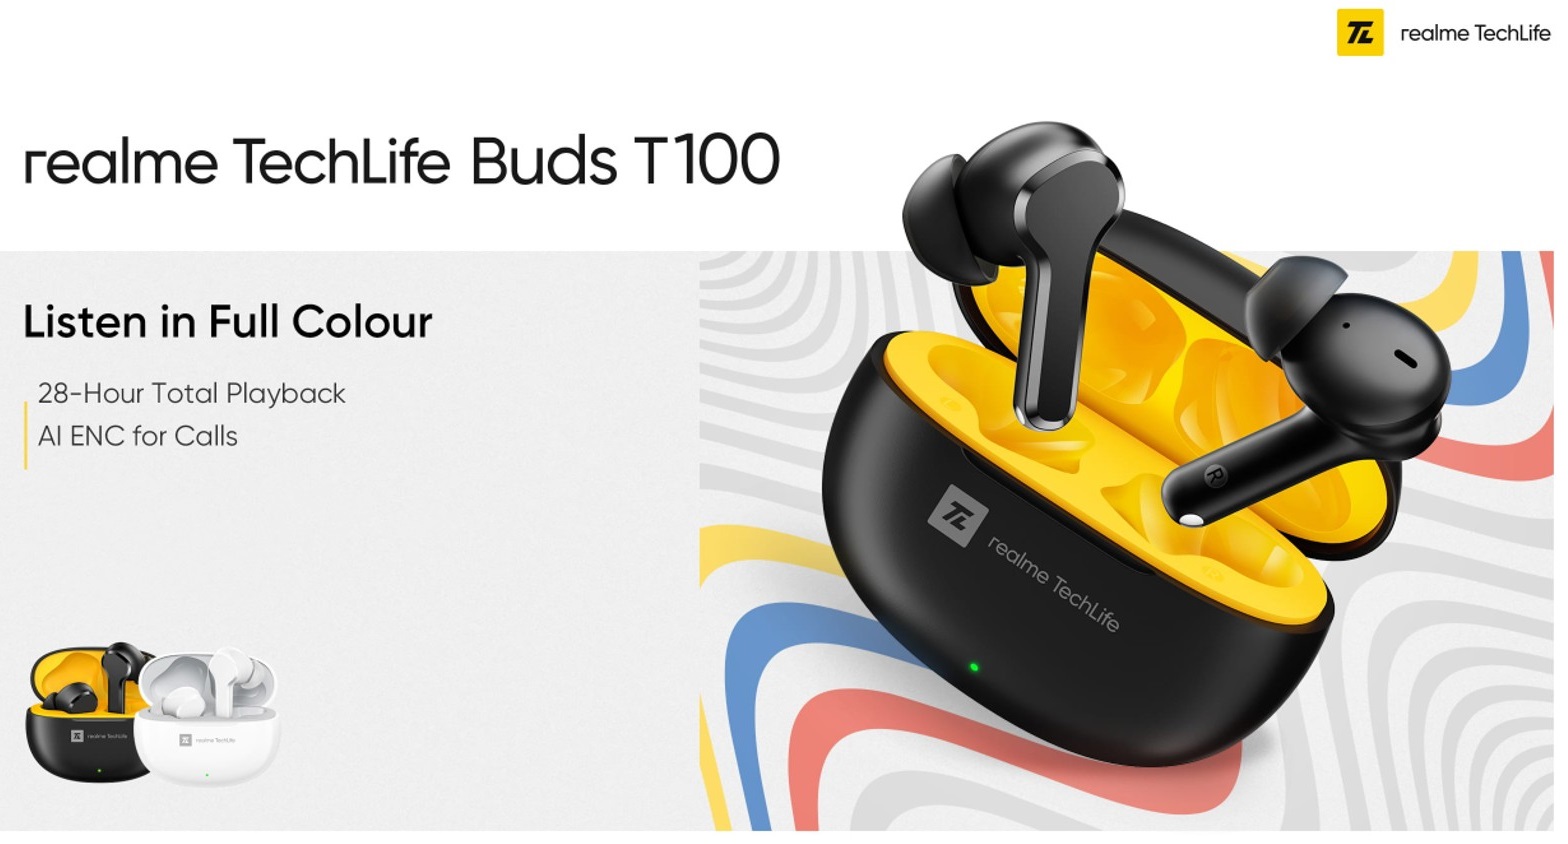 Realme TechLife Buds T100: wireless earphones up to 6 hours of battery life with AI ENC launched in India Realme TechLife Buds T100 1